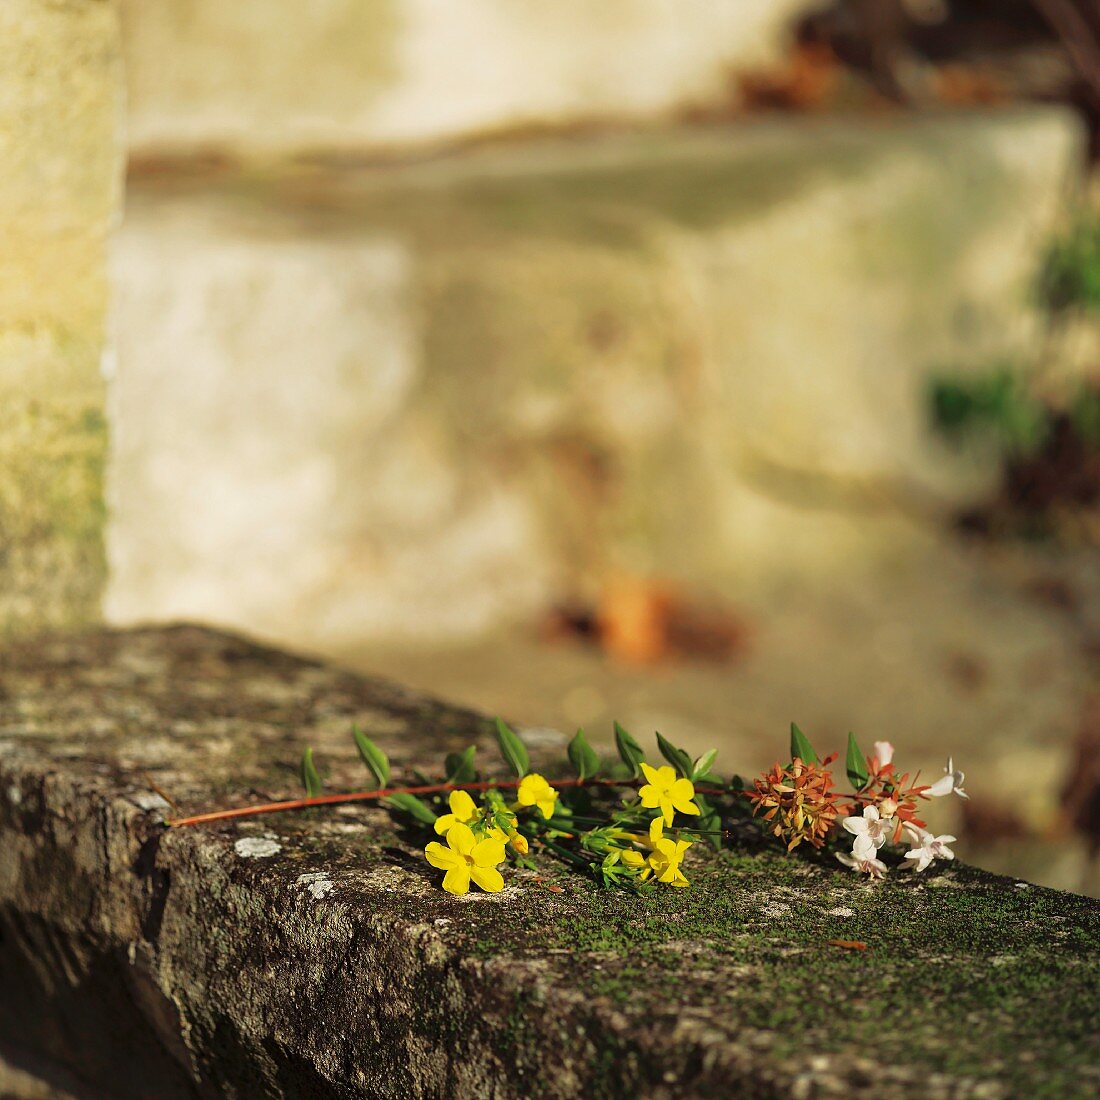 Sprig of yellow flowers on mossy stone coping